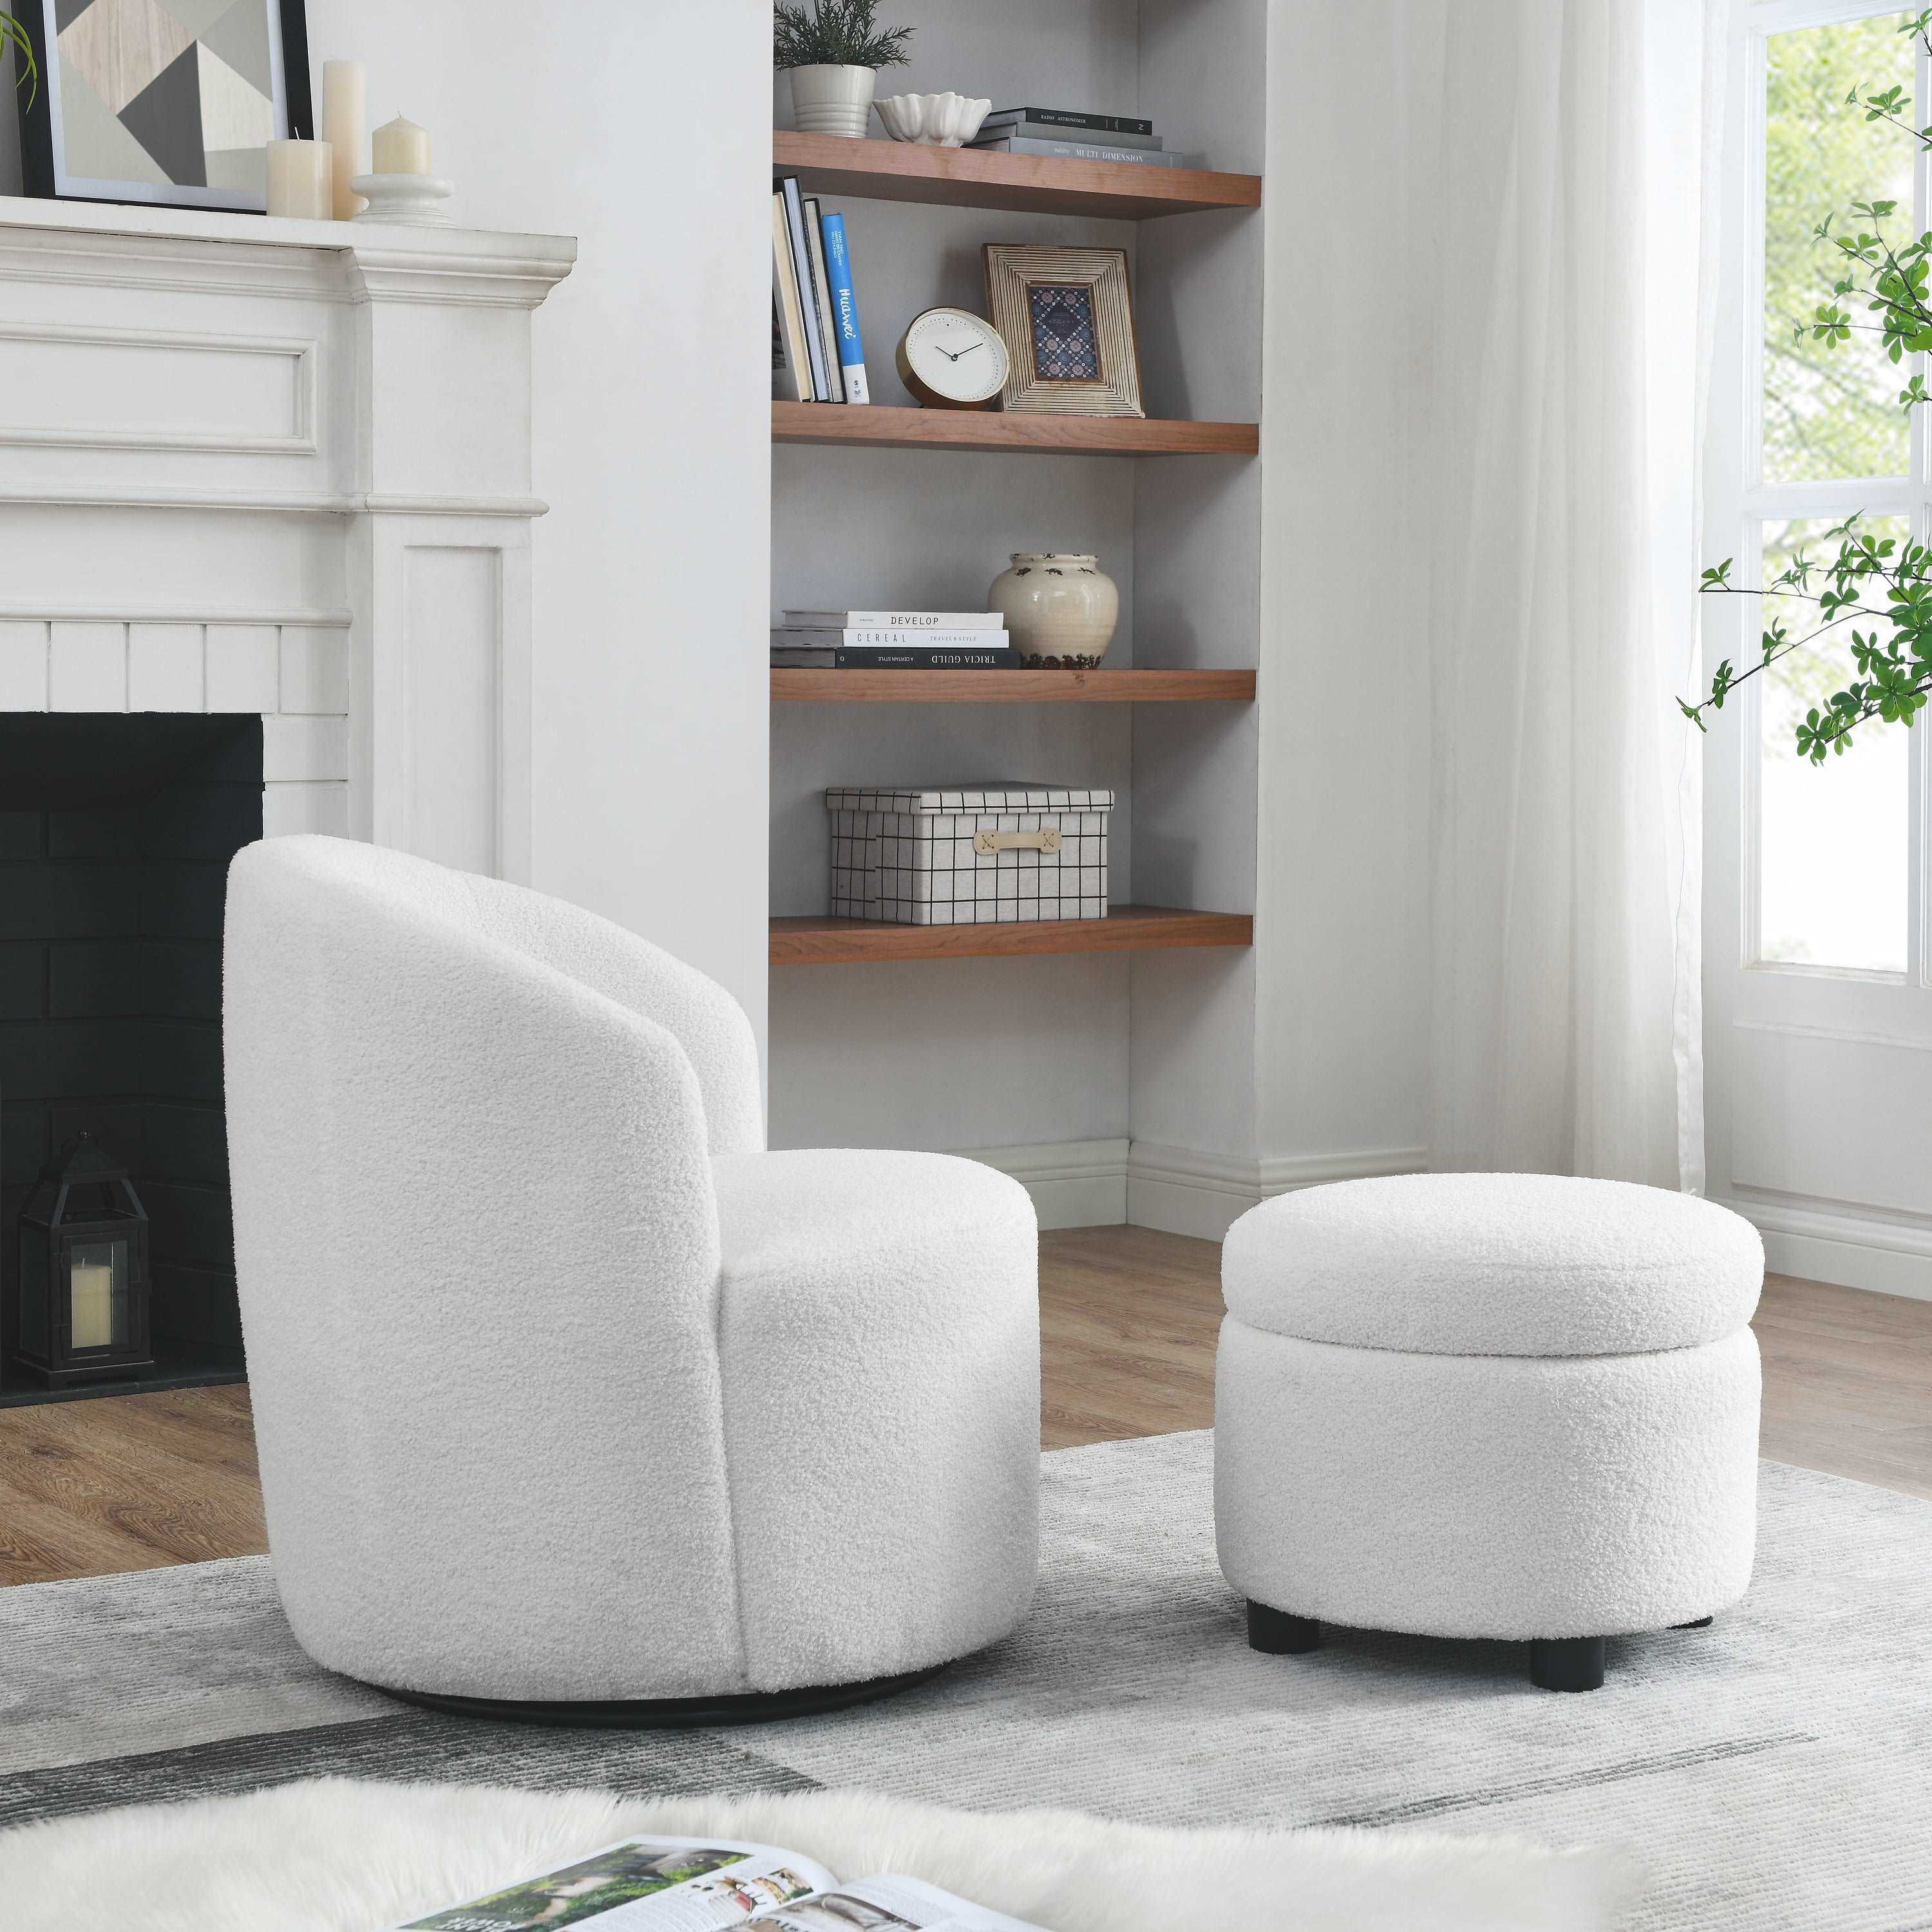 Bellemave Living Room 360 ° Swivel Chair with Round Storage